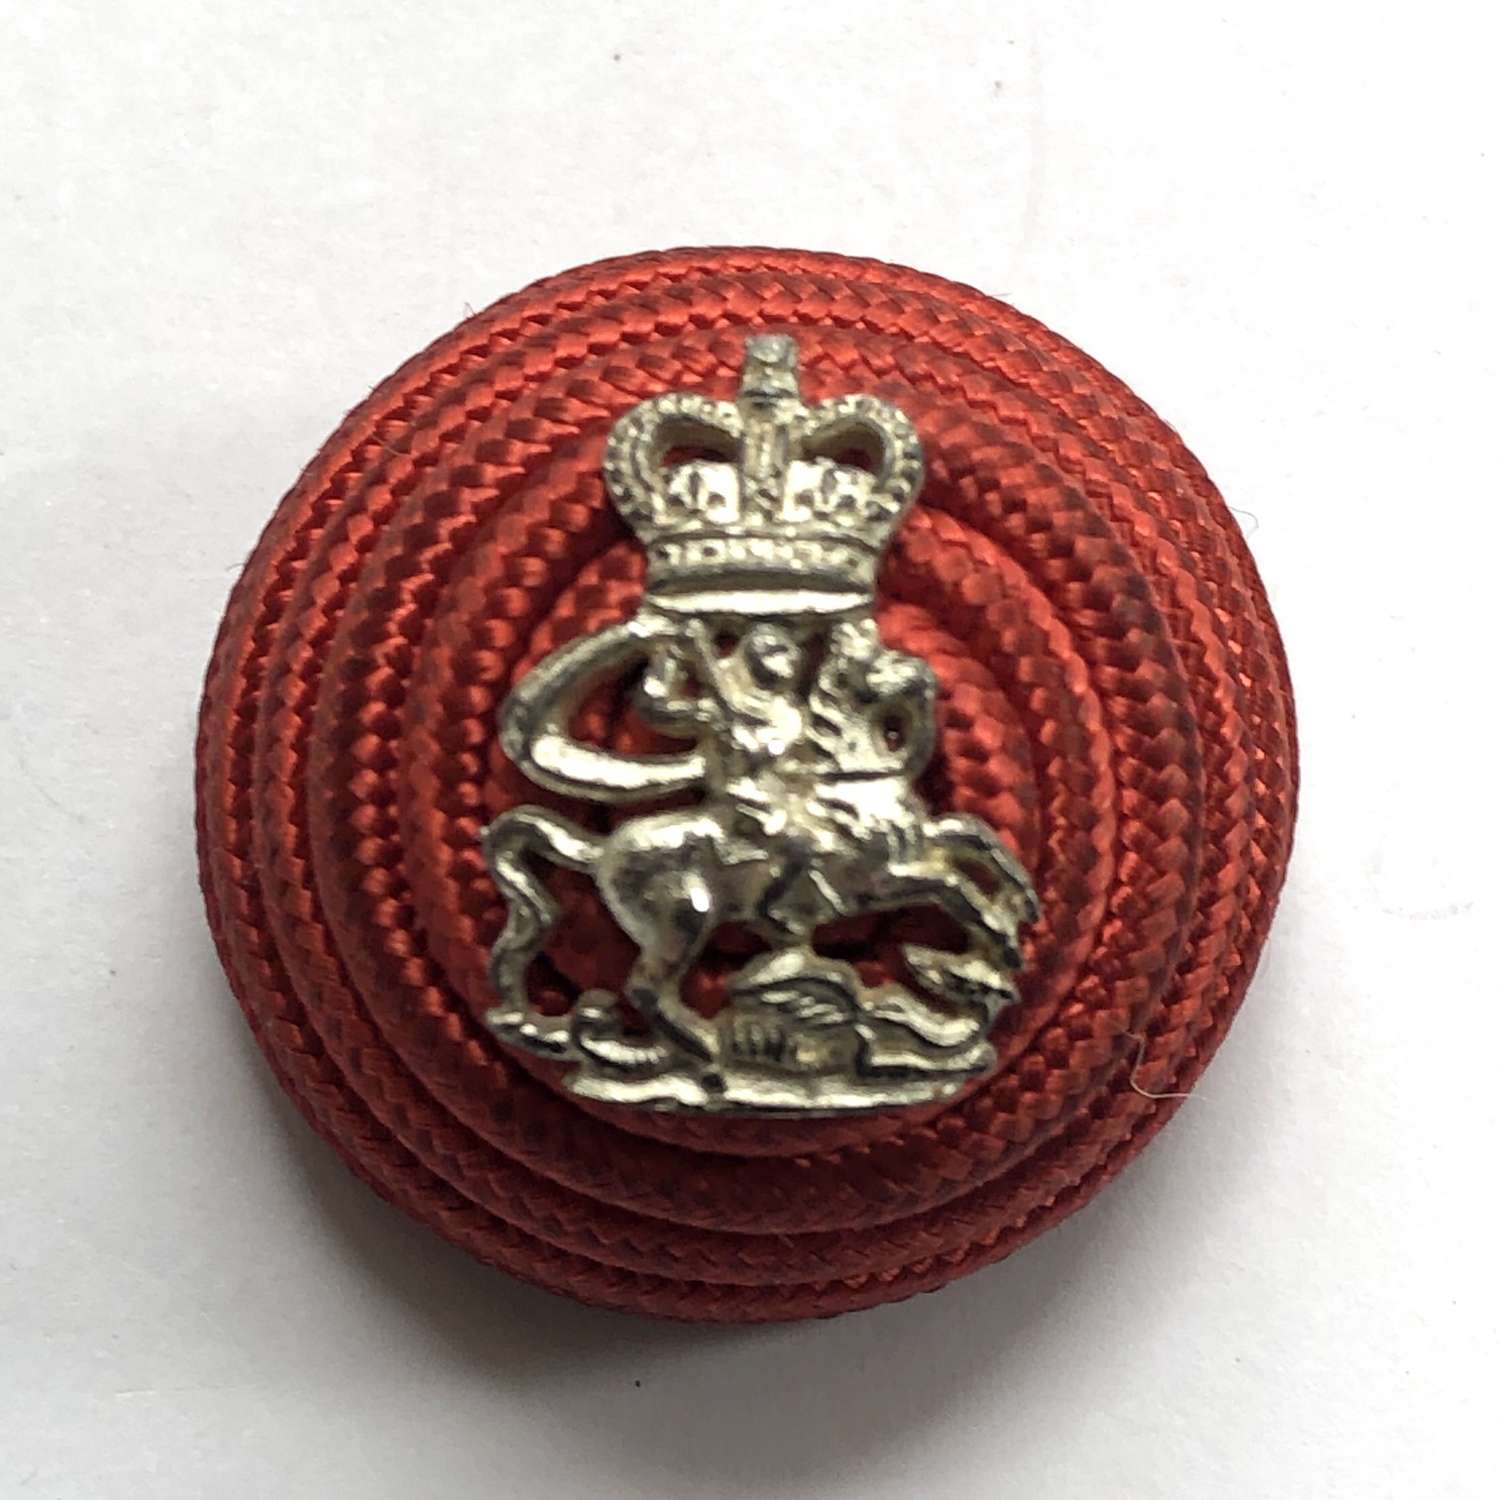 9th London Queen Victoria’s Rifles Officer’s post 1953 red cord bo